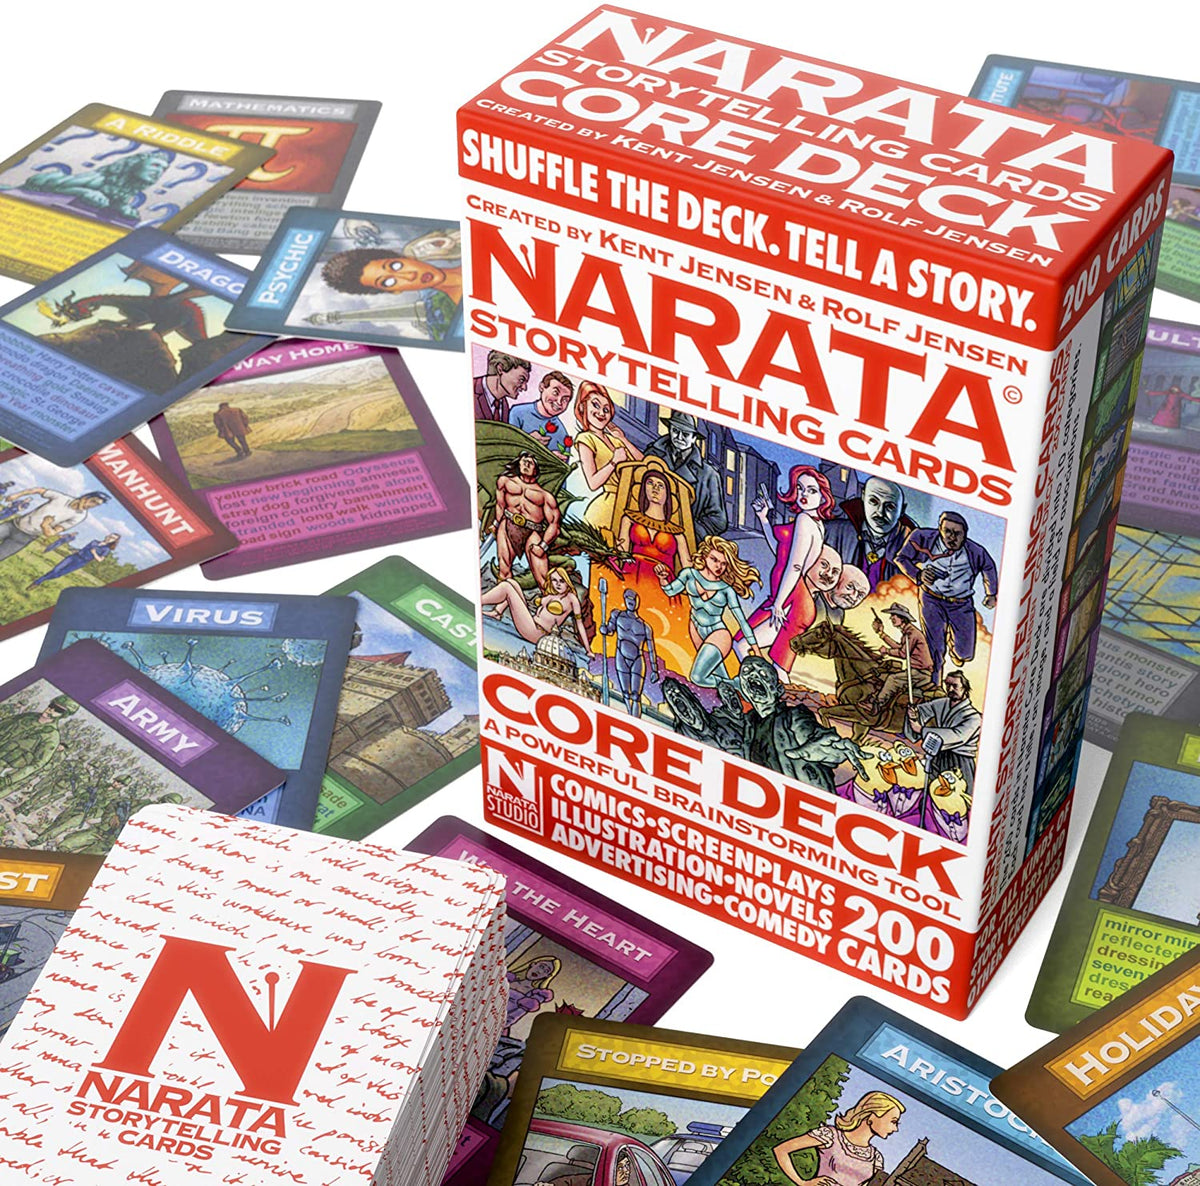 Narata Storytelling Cards - 200 Illustrated Cards - Plot Novels Movies - Brainstorming Tool - 10 Card Categories - with Story Structure Tips